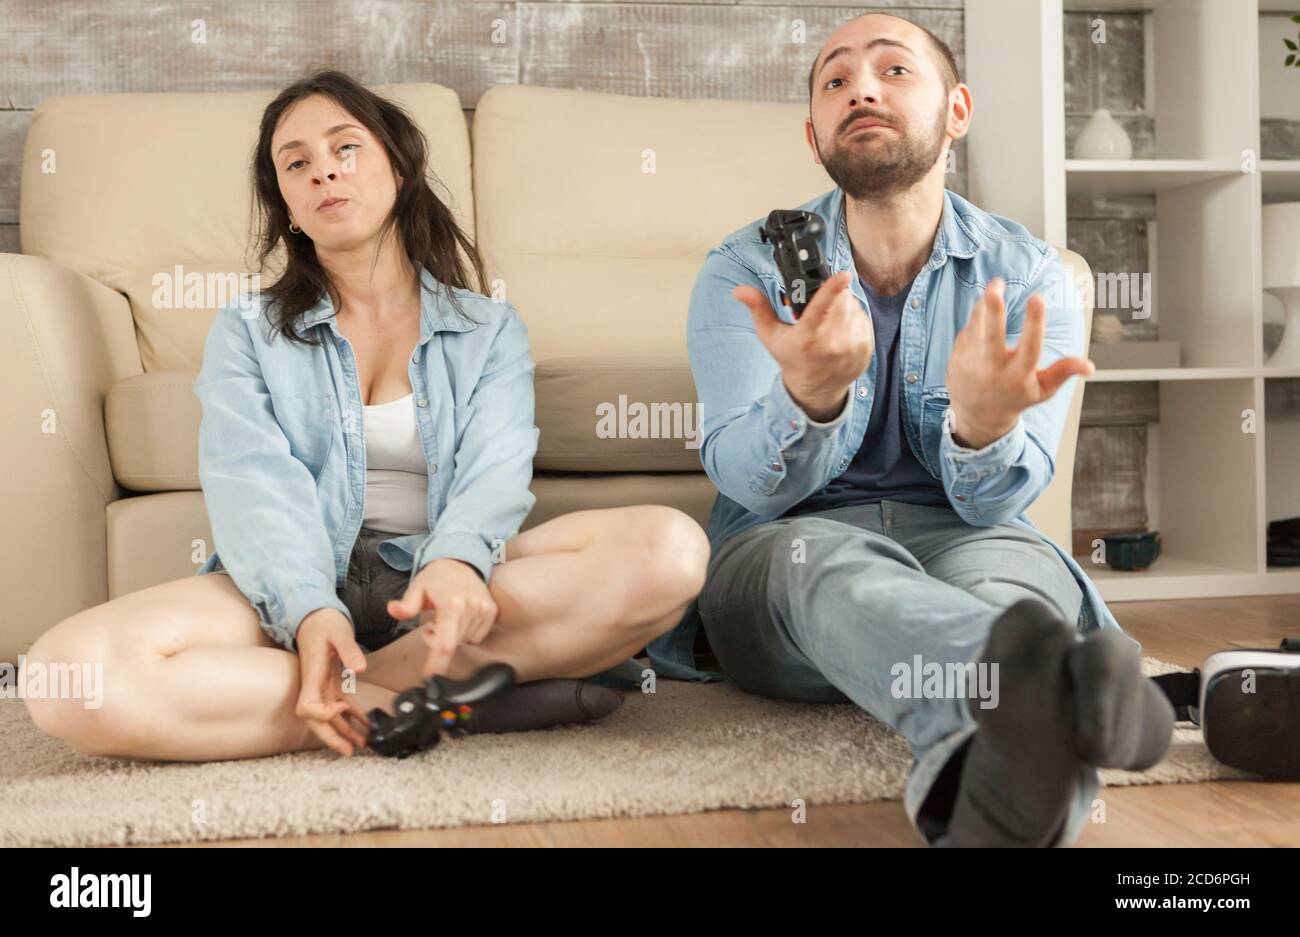 Couple losing at online video games using wireless controllers. Stock Photo